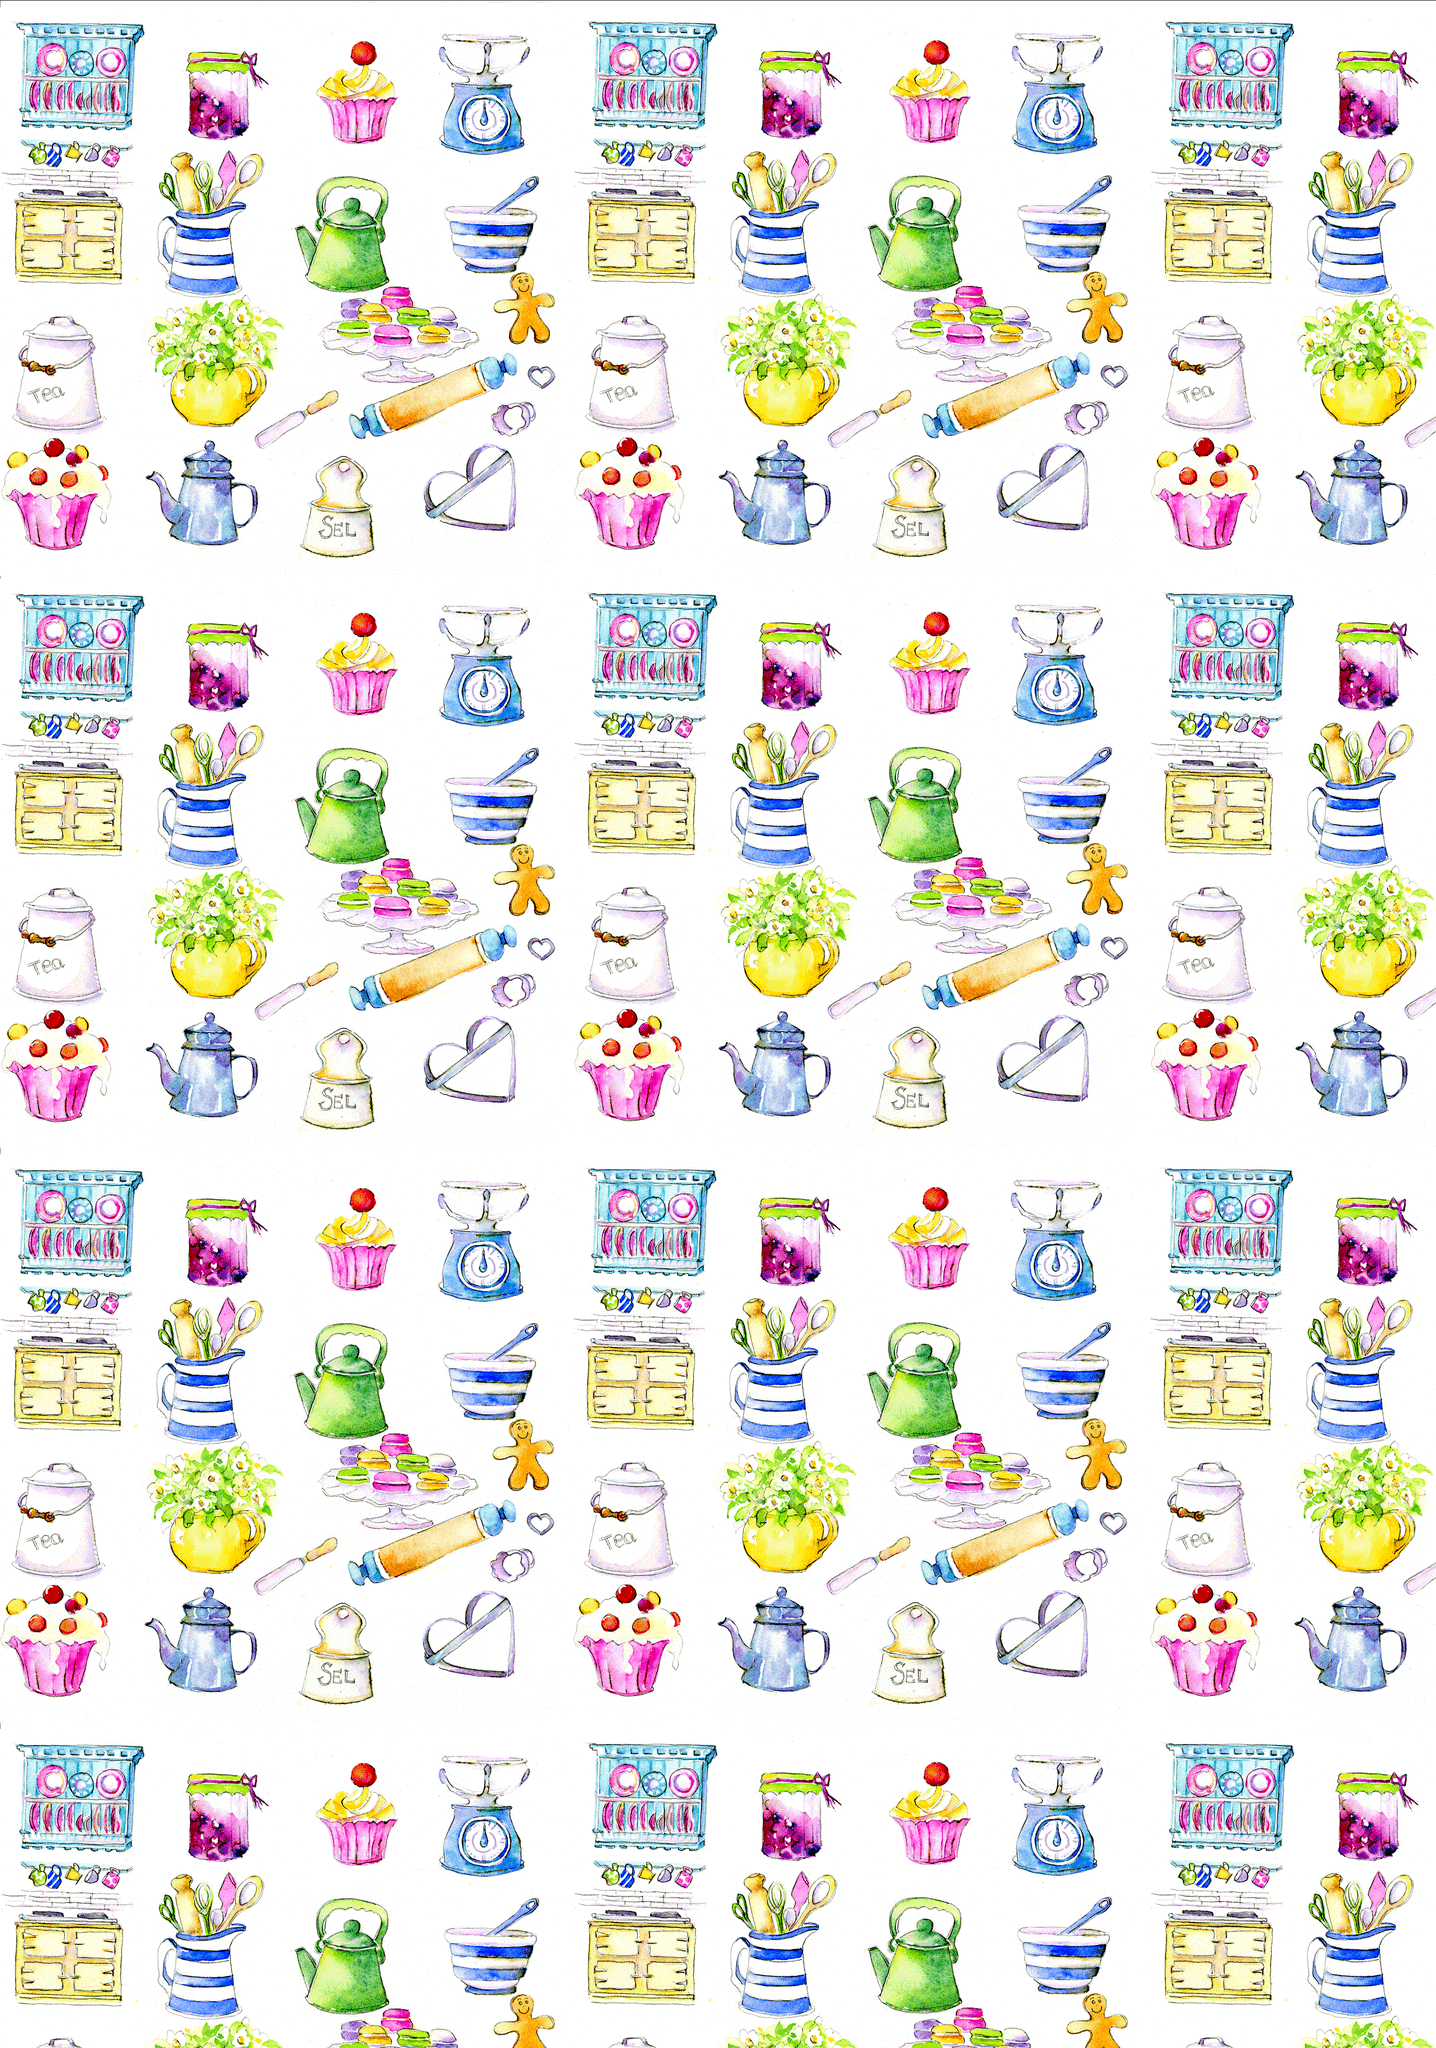 Cooking and Baking Gift Wrap designed by artist Sheila Gill
